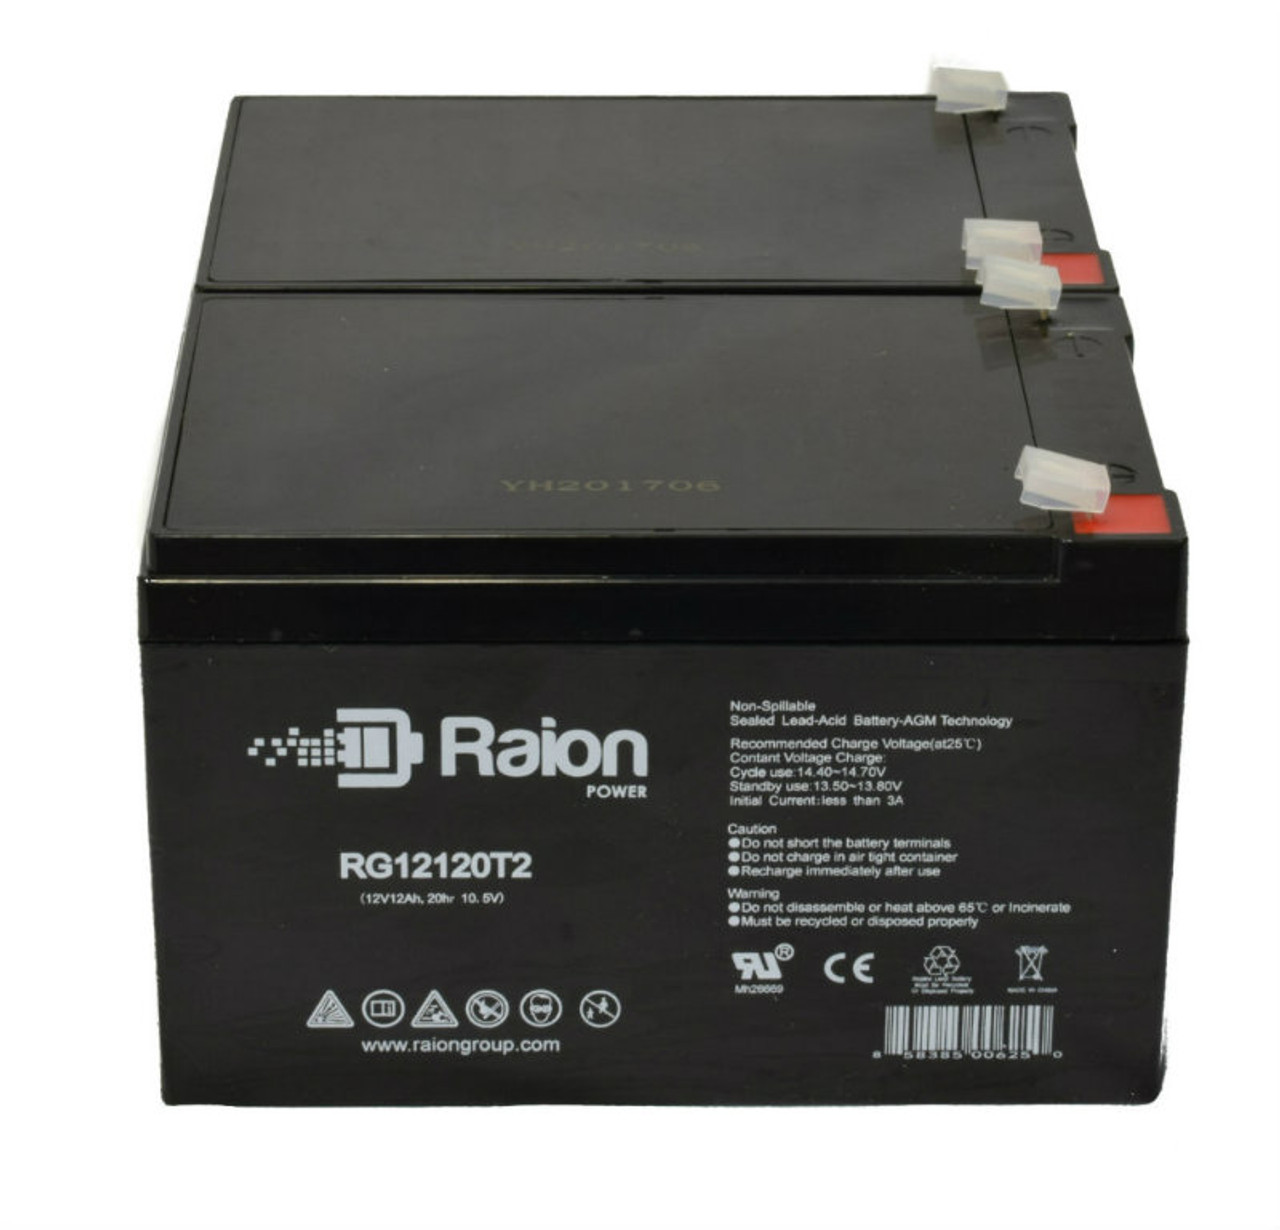 Raion Power 12V 12Ah Non-Spillable Compatible Replacement Battery for Q-Power QP12-12 - (2 Pack)